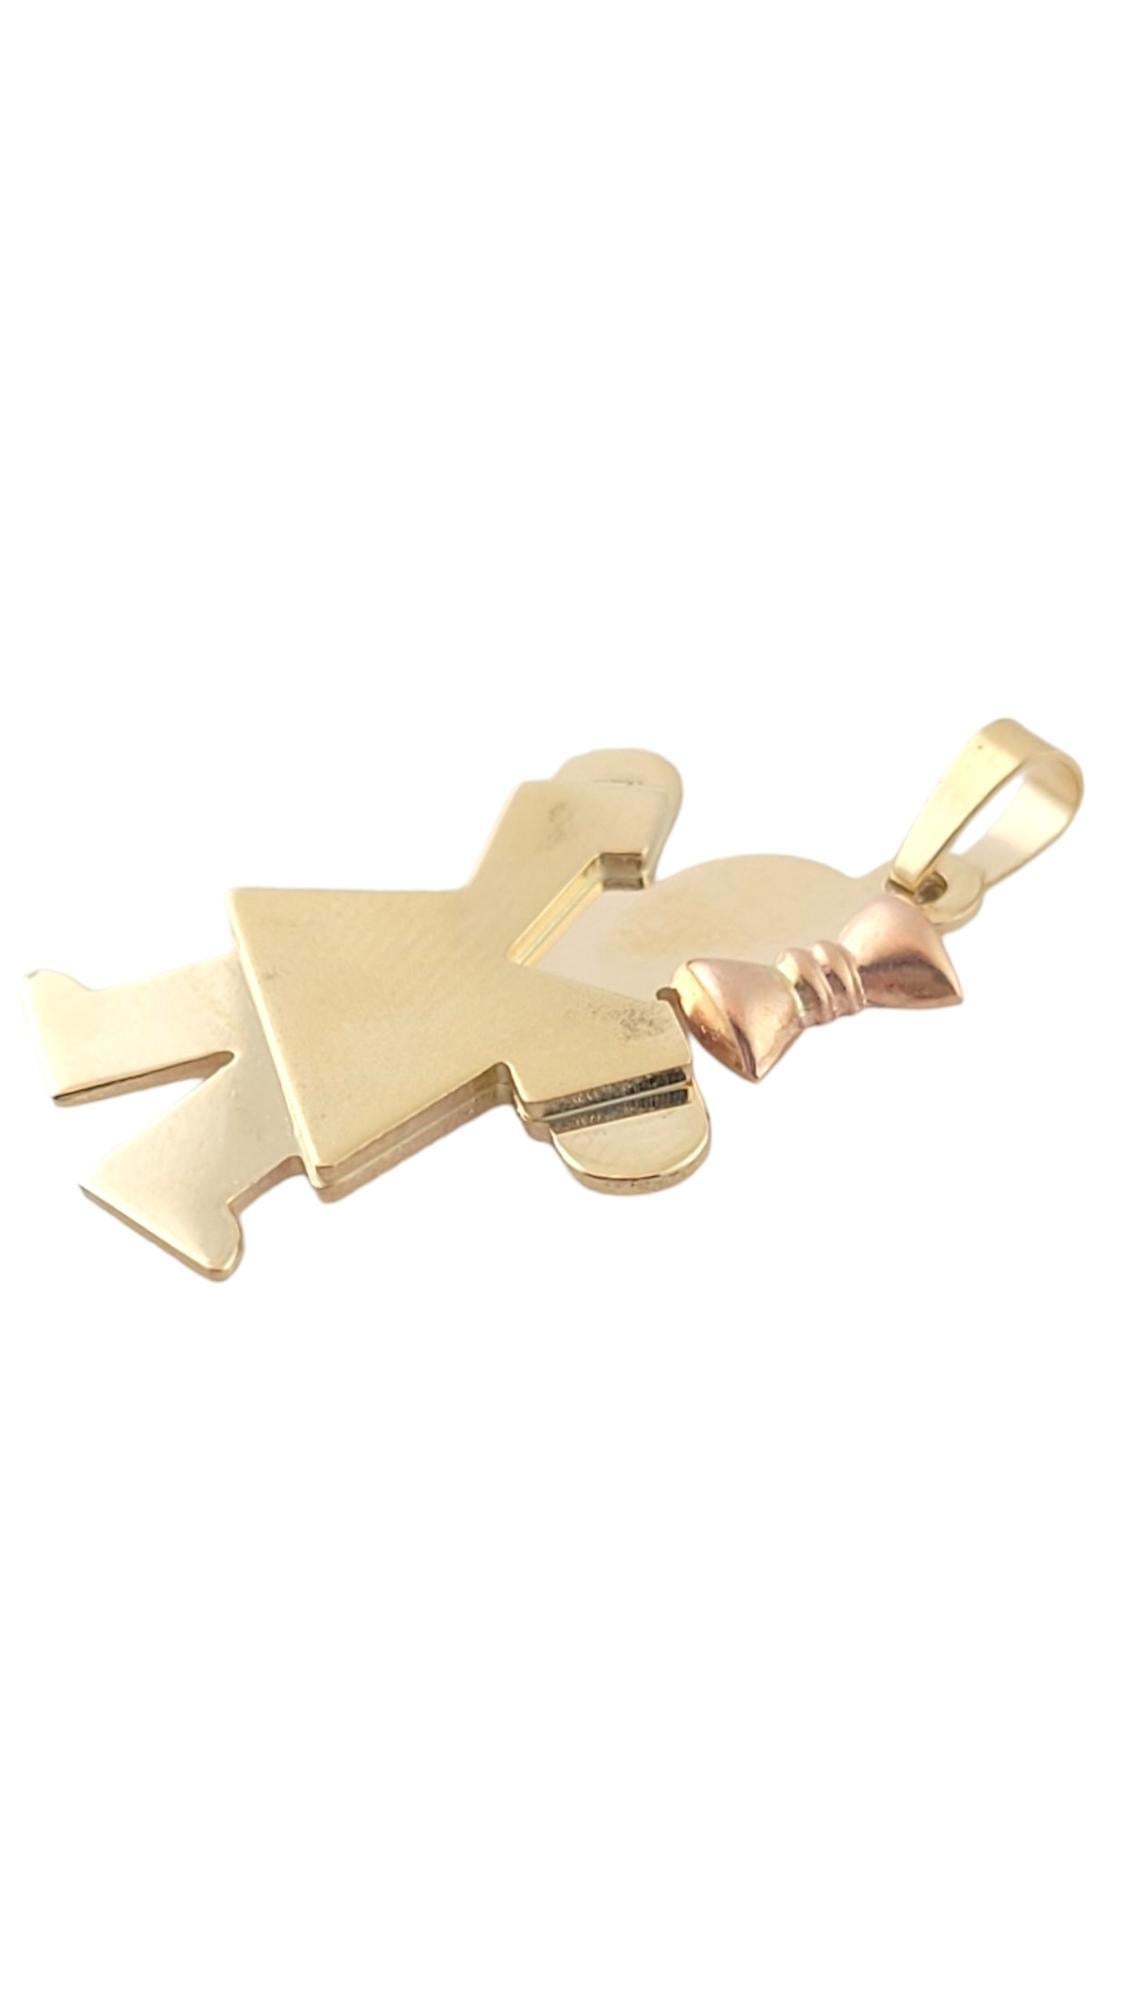 Vintage 14K Yellow Gold Girl with Rose Gold Bow Charm

This cute 14K yellow gold charm shows an adorable girl with a 14K rose gold bow!

Size: 25.23mm X 18.15mm X 2.33mm

Weight: 1.7 dwt/ 2.7 g

Hallmark: Seu14K

Very good condition, professionally